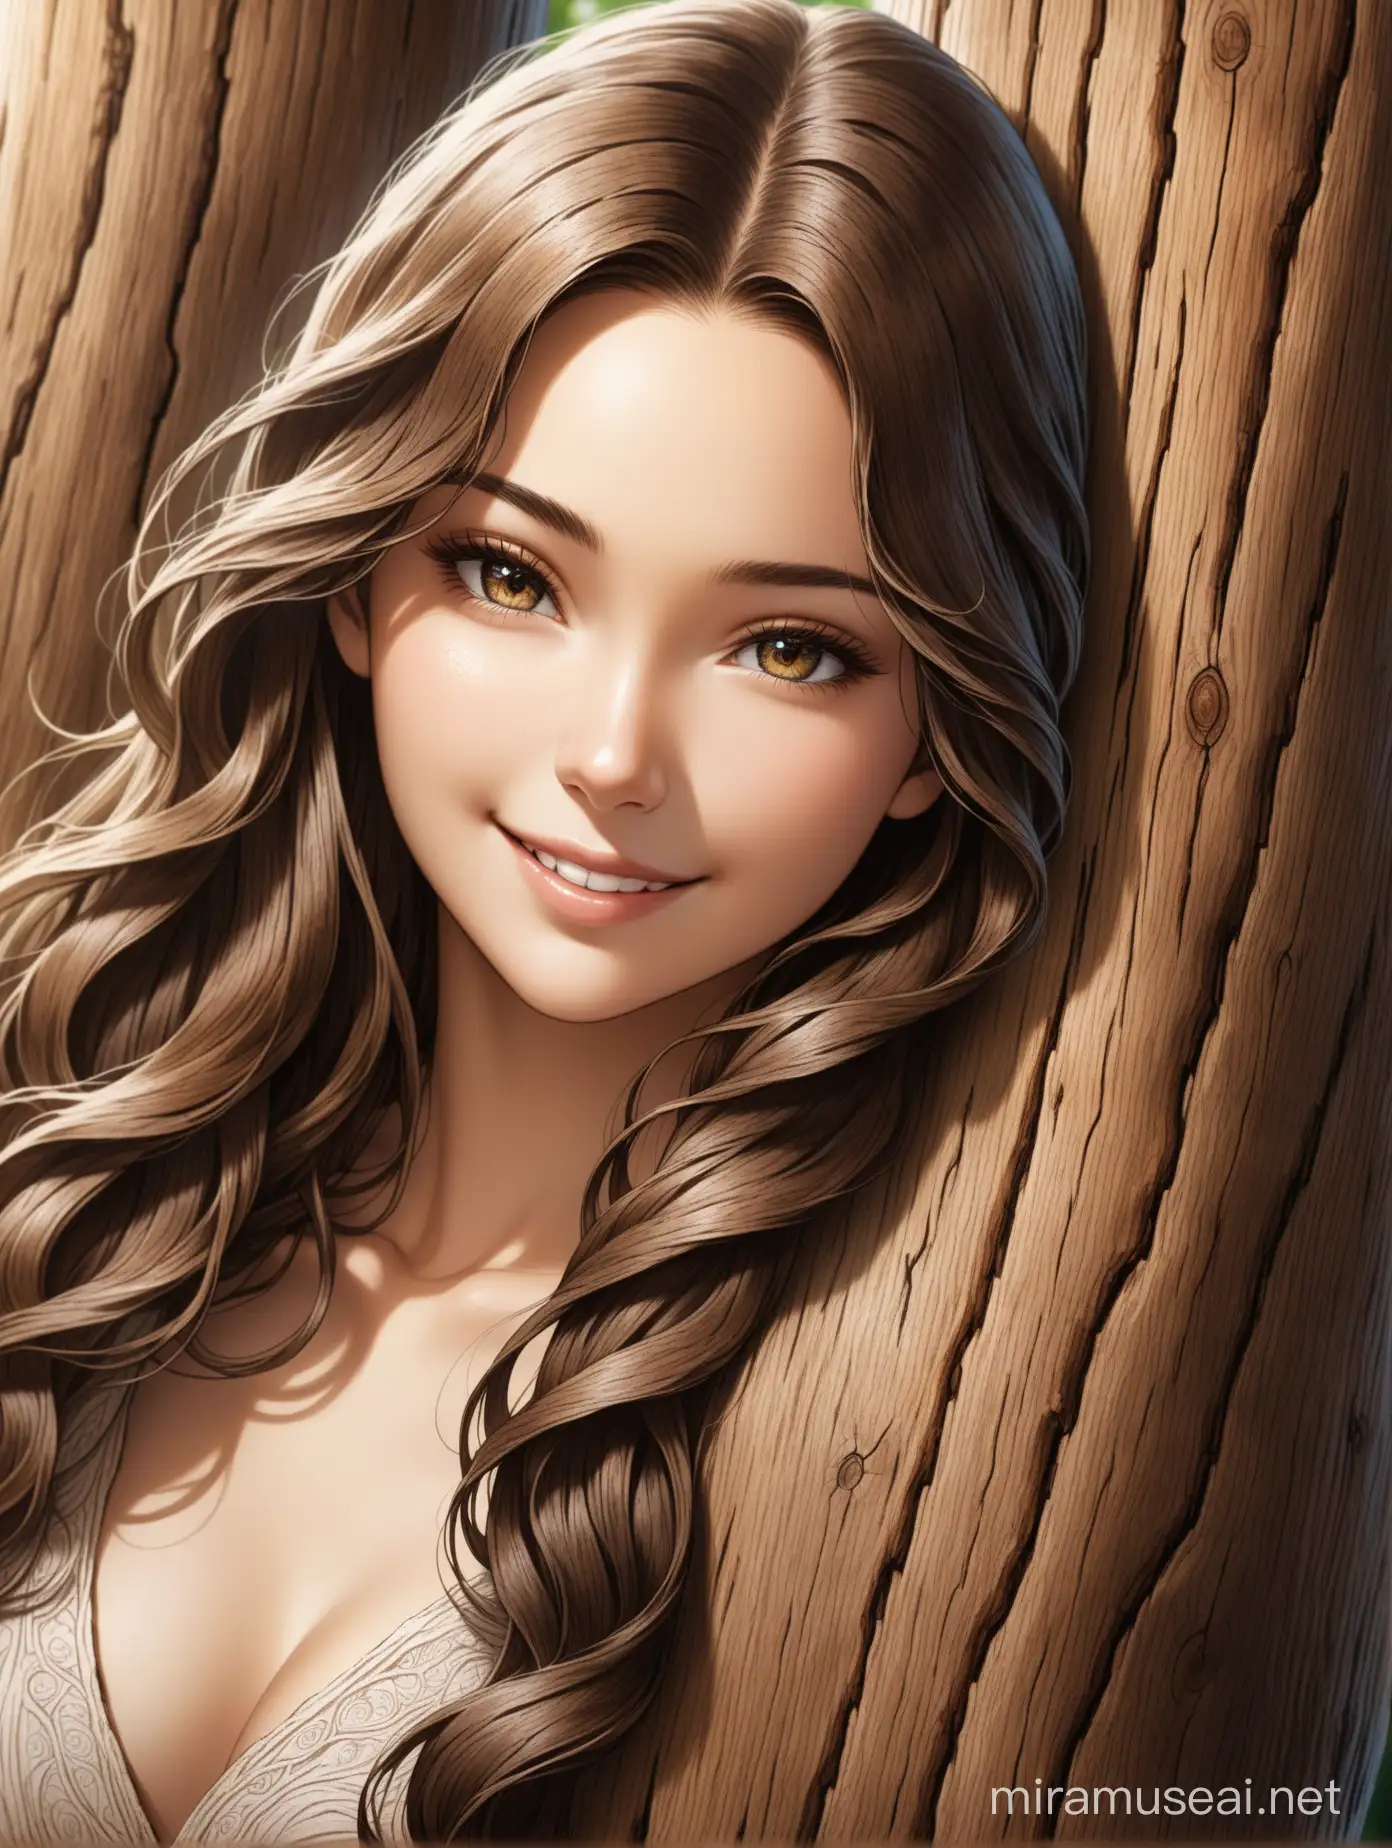 engraving on the veined wood of an old tree trunk, handmade, texture and relief,
the face of a beautiful and young woman, long and wavy hair, smiling,
great details, precise focus, details in the hair and on the face, harmony, seductive